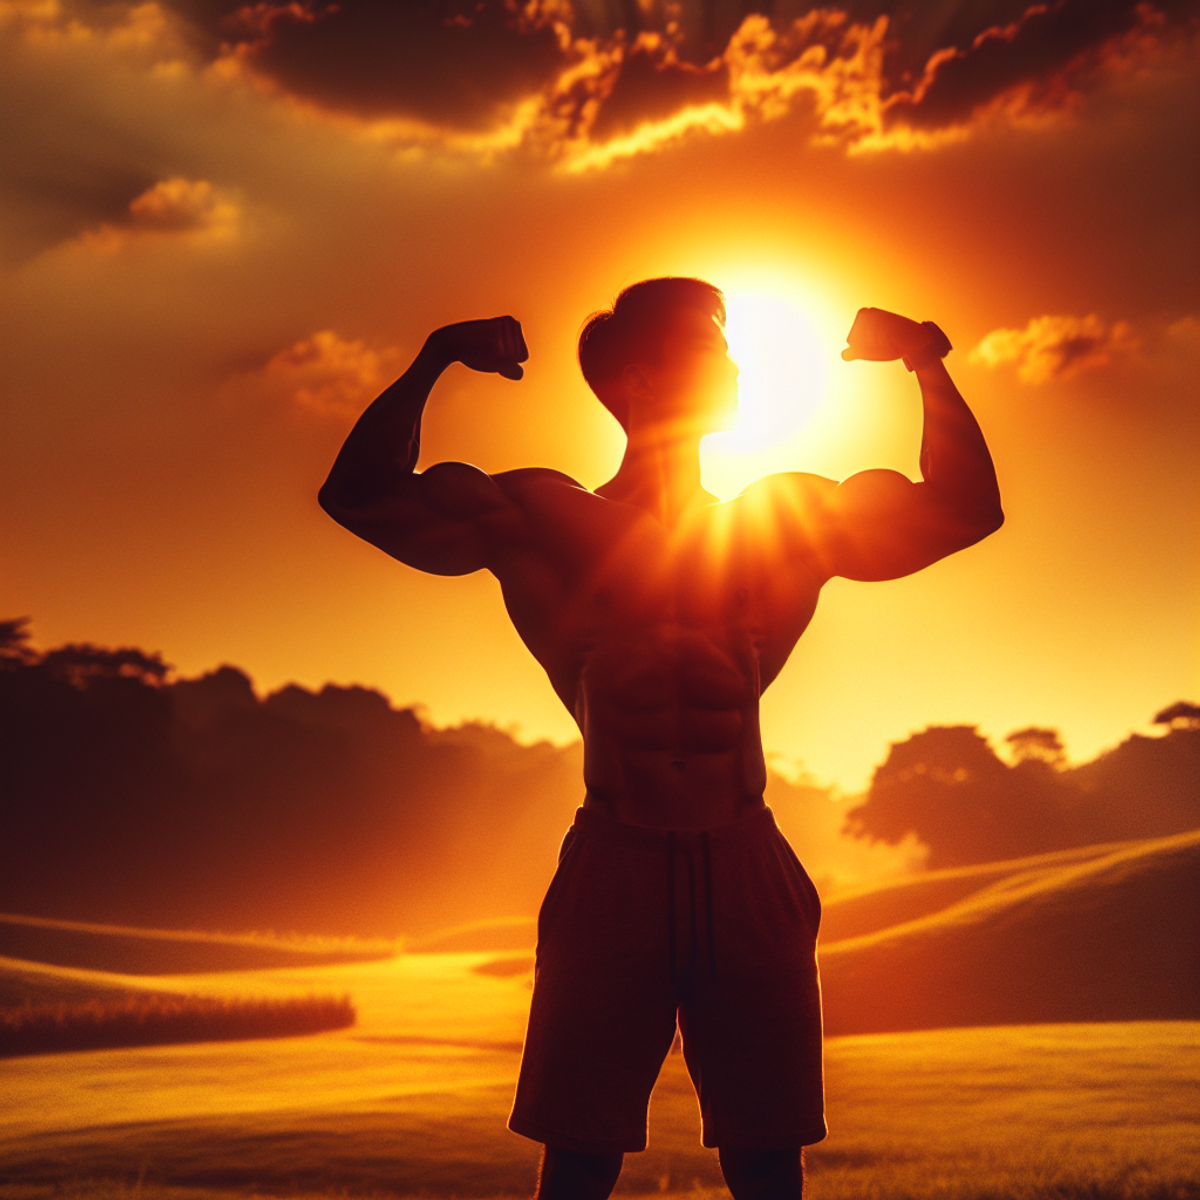 A person with an athletic build and Asian descent, standing outdoors, flexing their prominent muscles against the background of a bright, blazing sun setting.